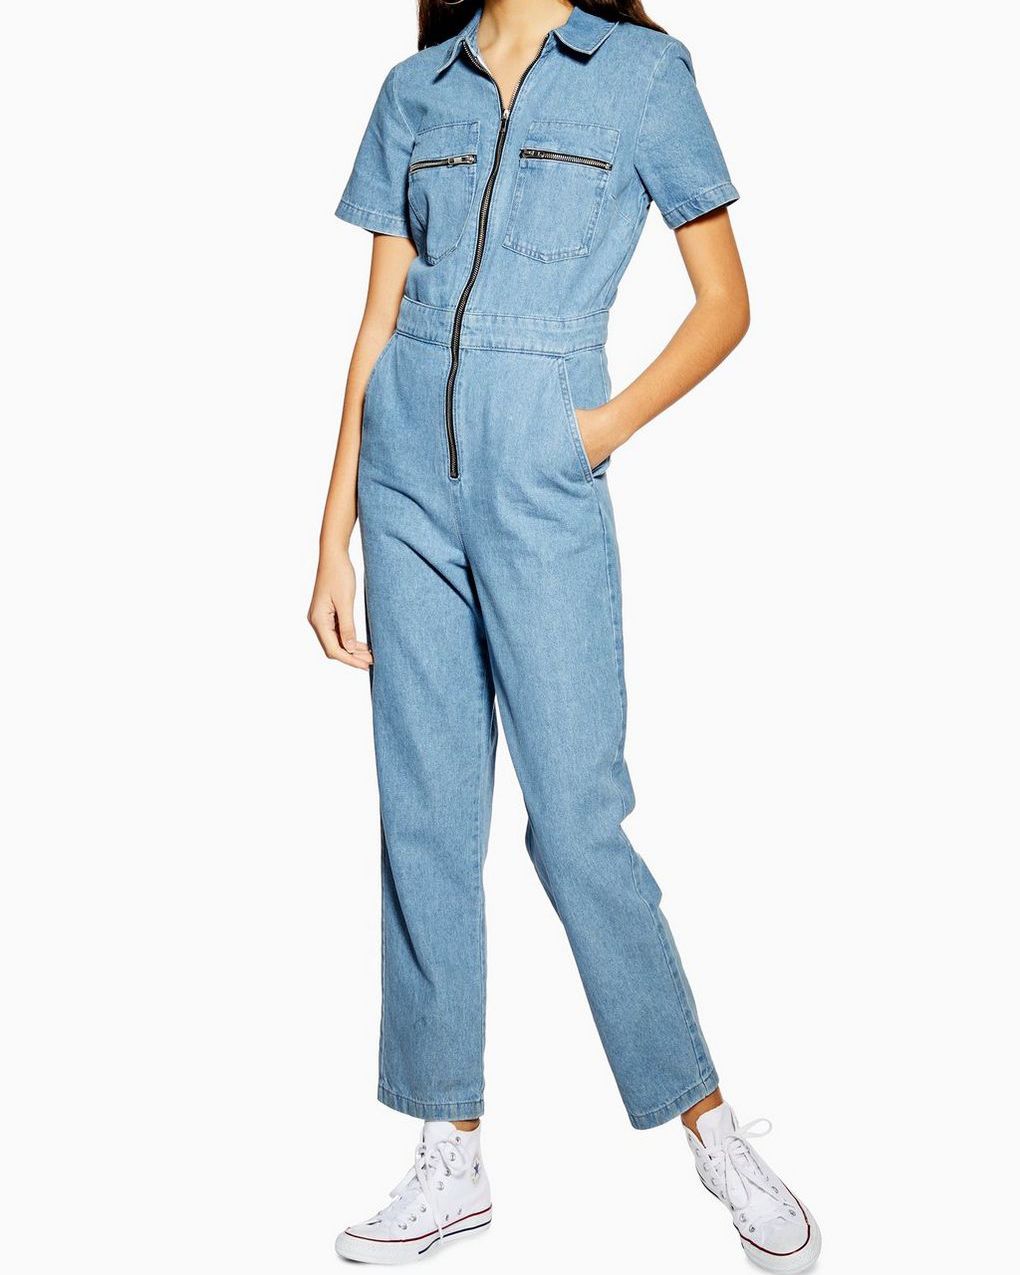 13 New Topshop Pieces I Just Lost It Over | Who What Wear